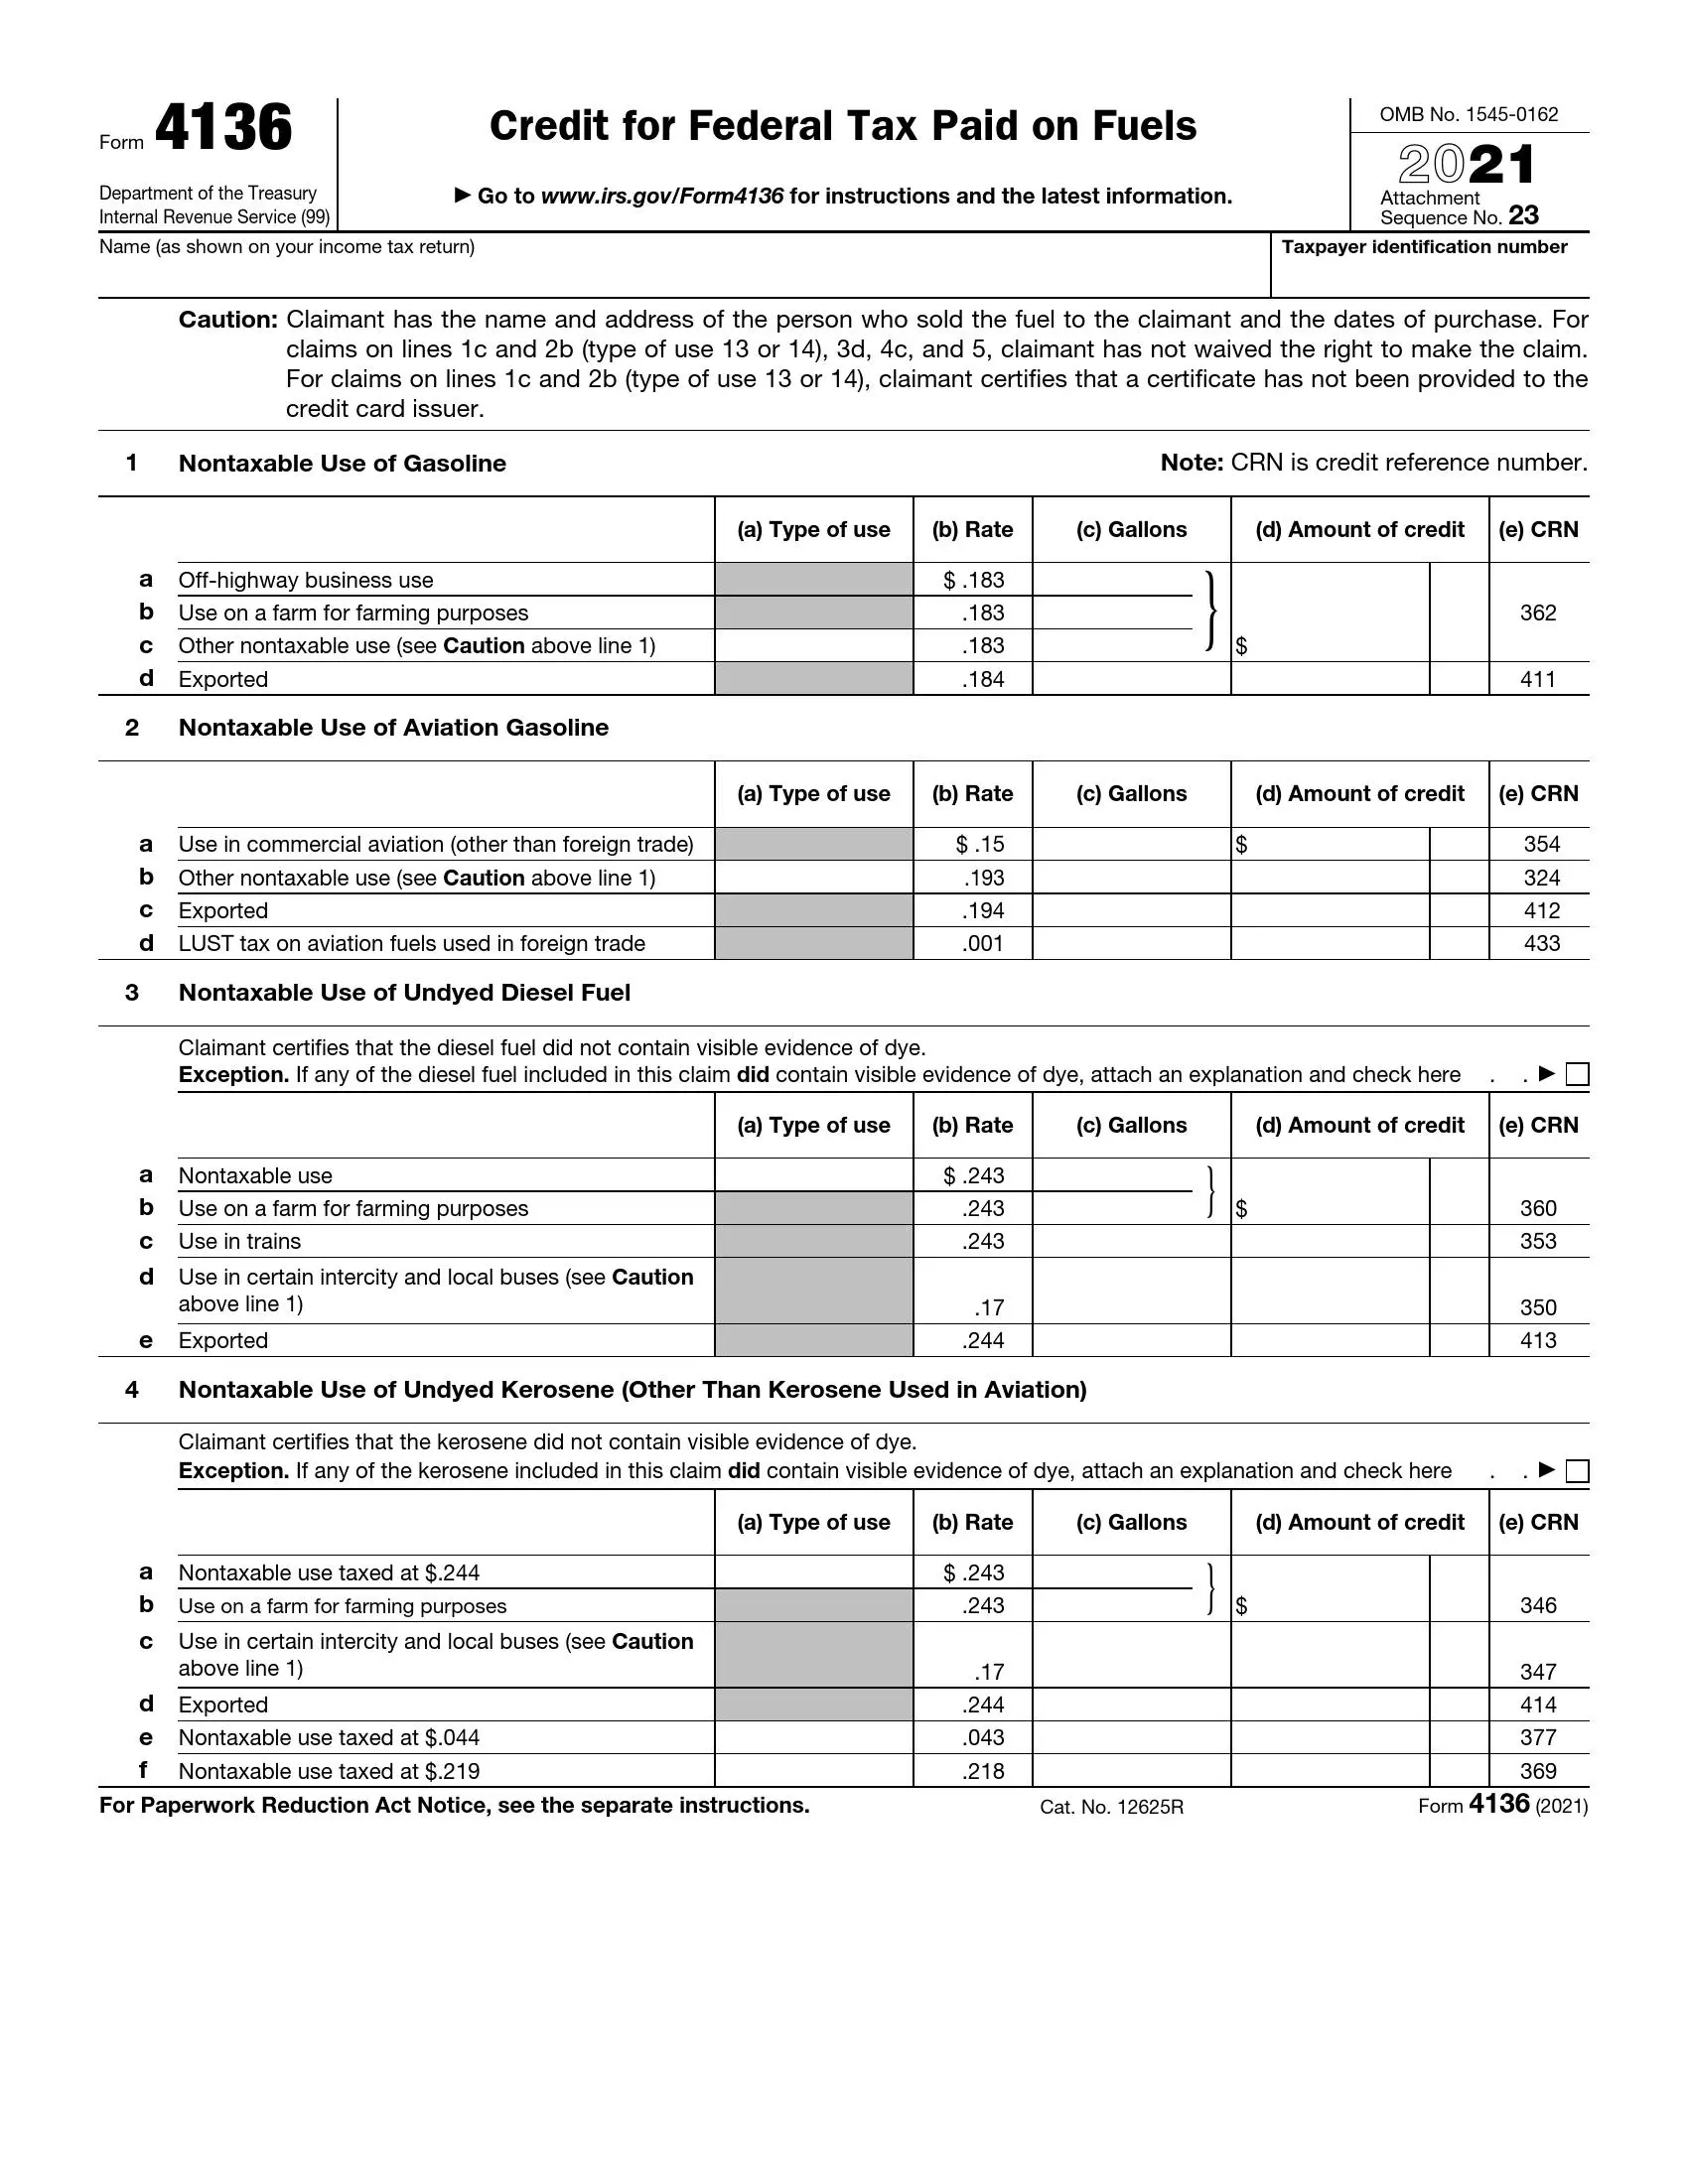 irs form 4136 2021 preview